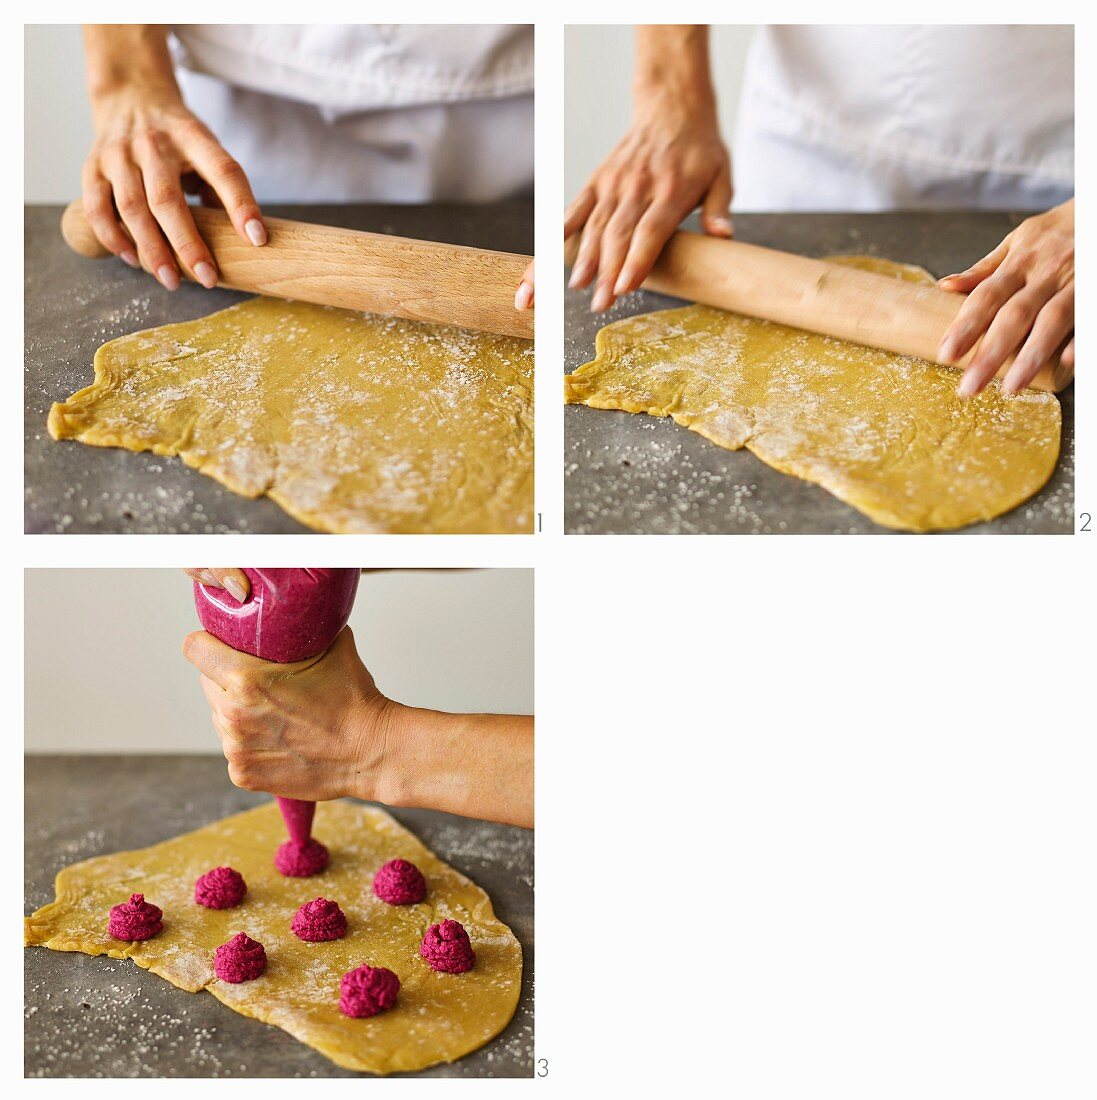 Beetroot panzerotti being made